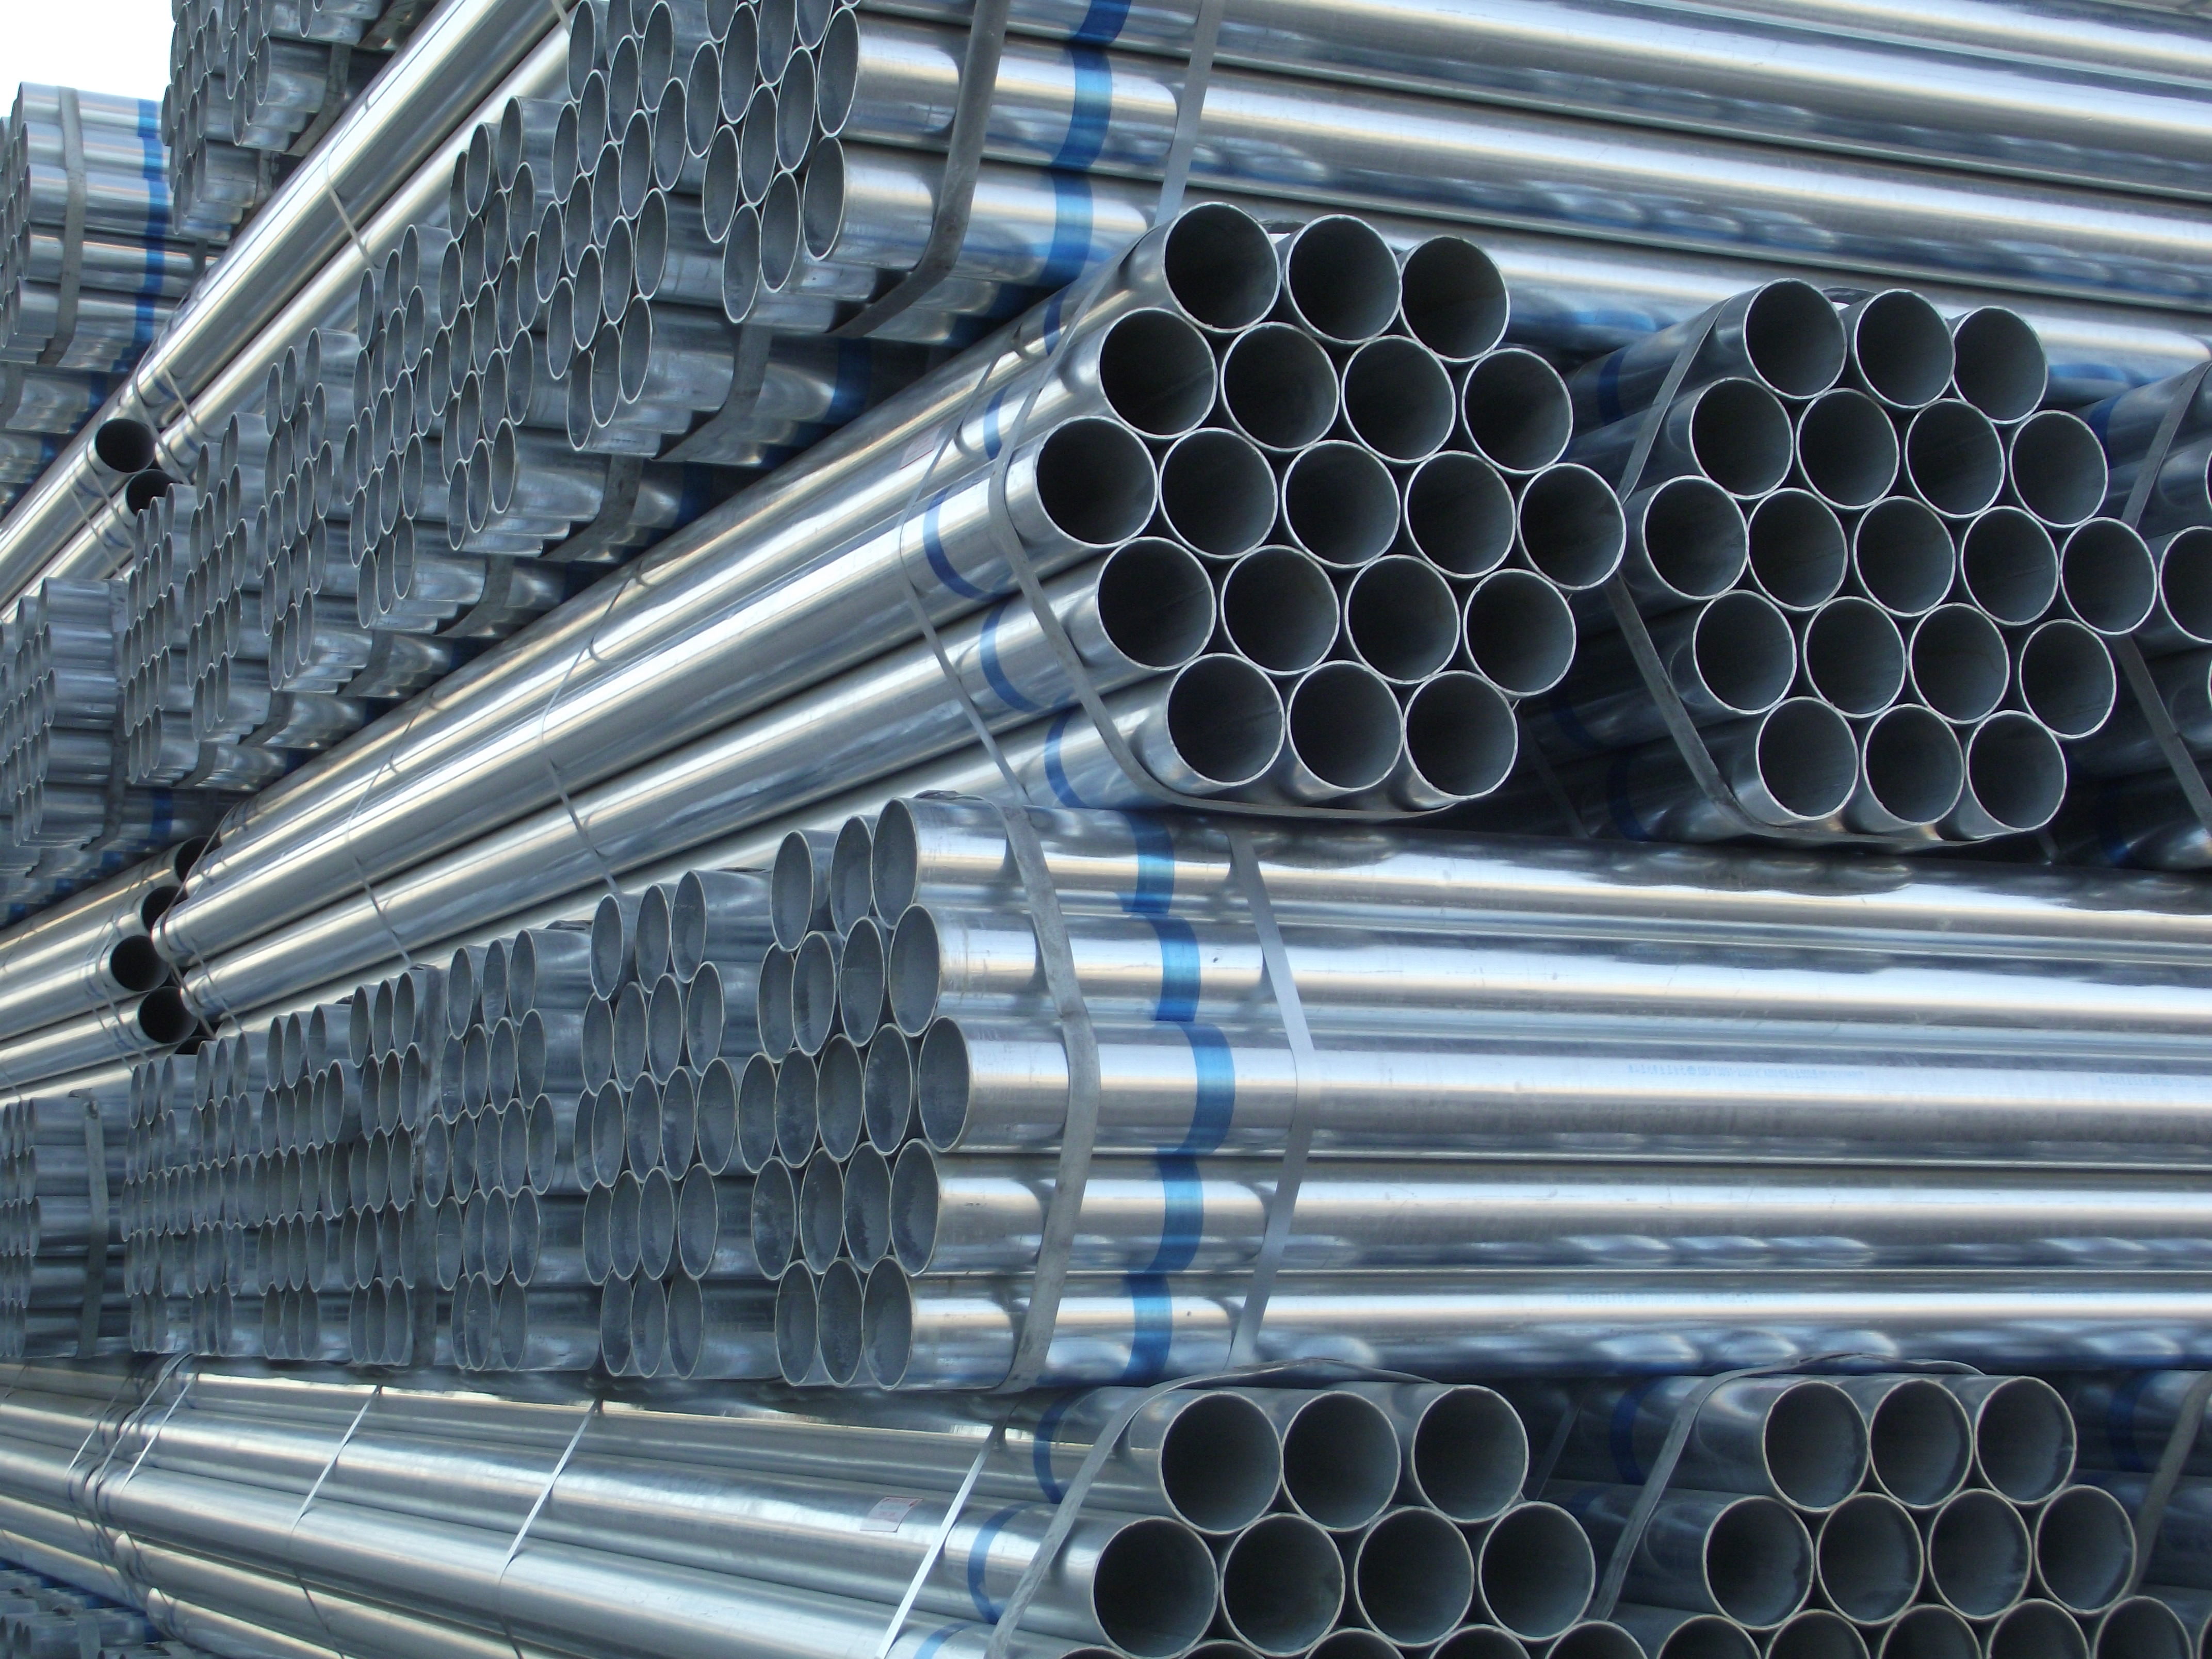 China New Product Square Hollow Steel Pipe - DIN 2440 Steel Pipe made in China by Tianjin Youfa Steel Pipe Group – Youfa